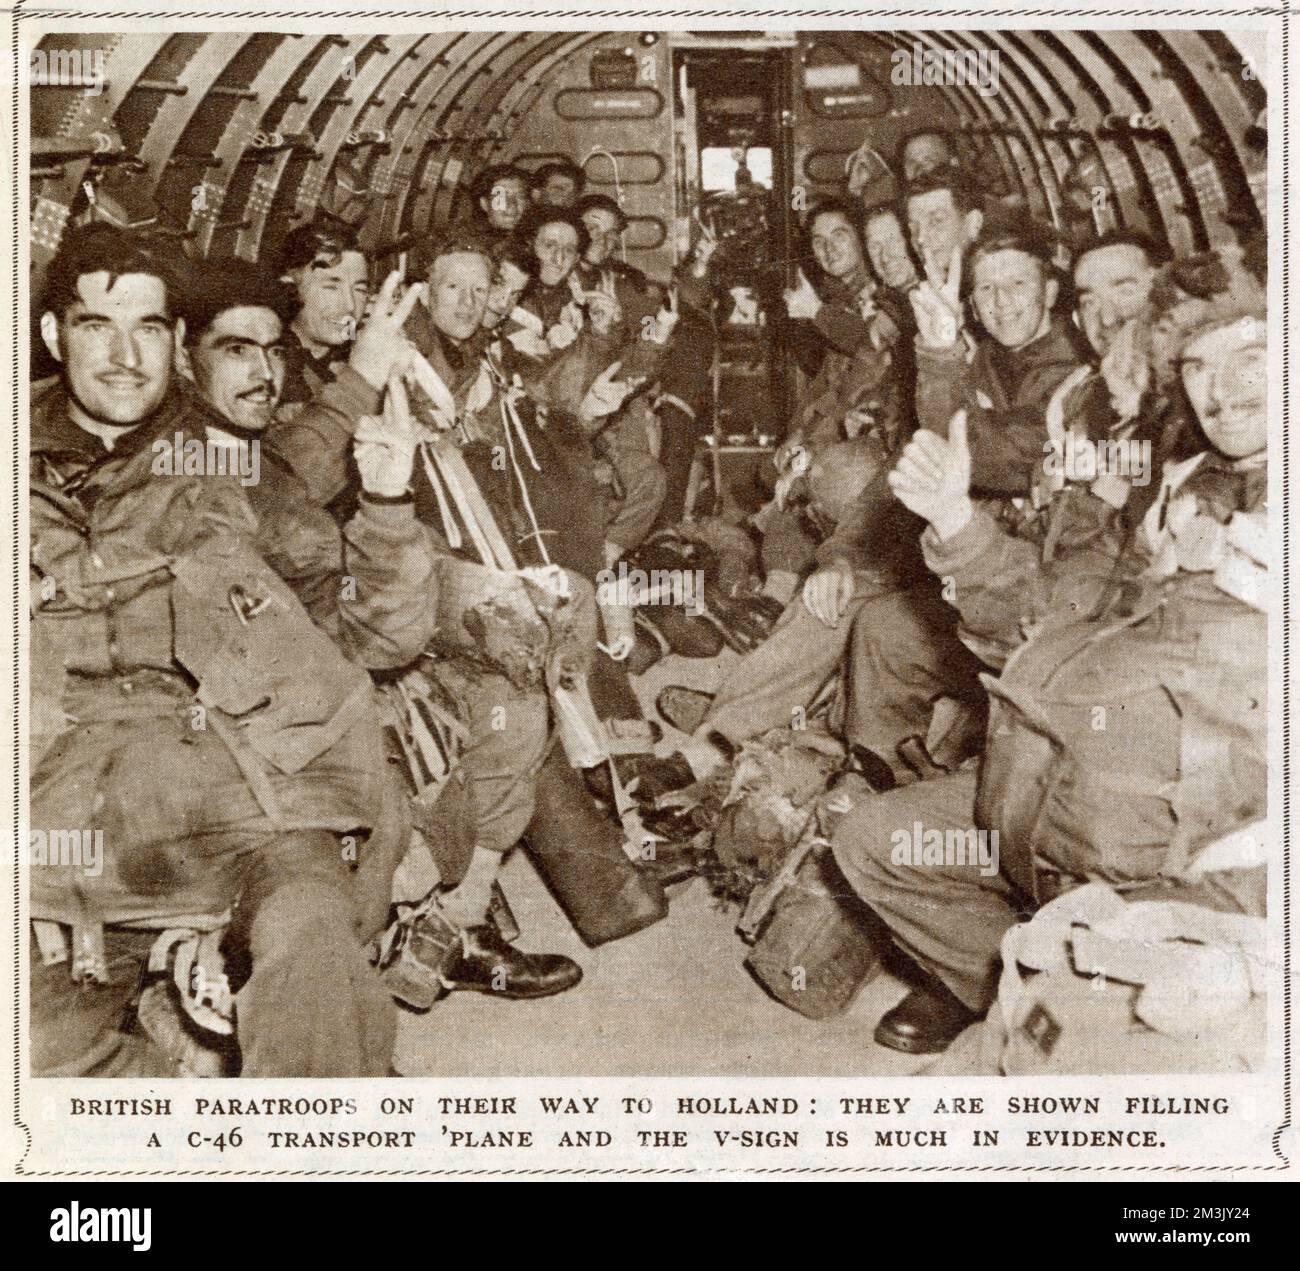 A unit of the British First Airborne Division in a glider on the way to Arnhem, September 1944.  On 17th September 1944 Operation 'Market Garden' was put into action; a bold plan devised by Field-Marshal Montgomery to drop thousands of airborne troops into Holland to capture an invasion route into Germany. The British First Airborne, American 81st and 101st Divisions took part in the plan, which was ultimately unsuccessful. Stock Photo